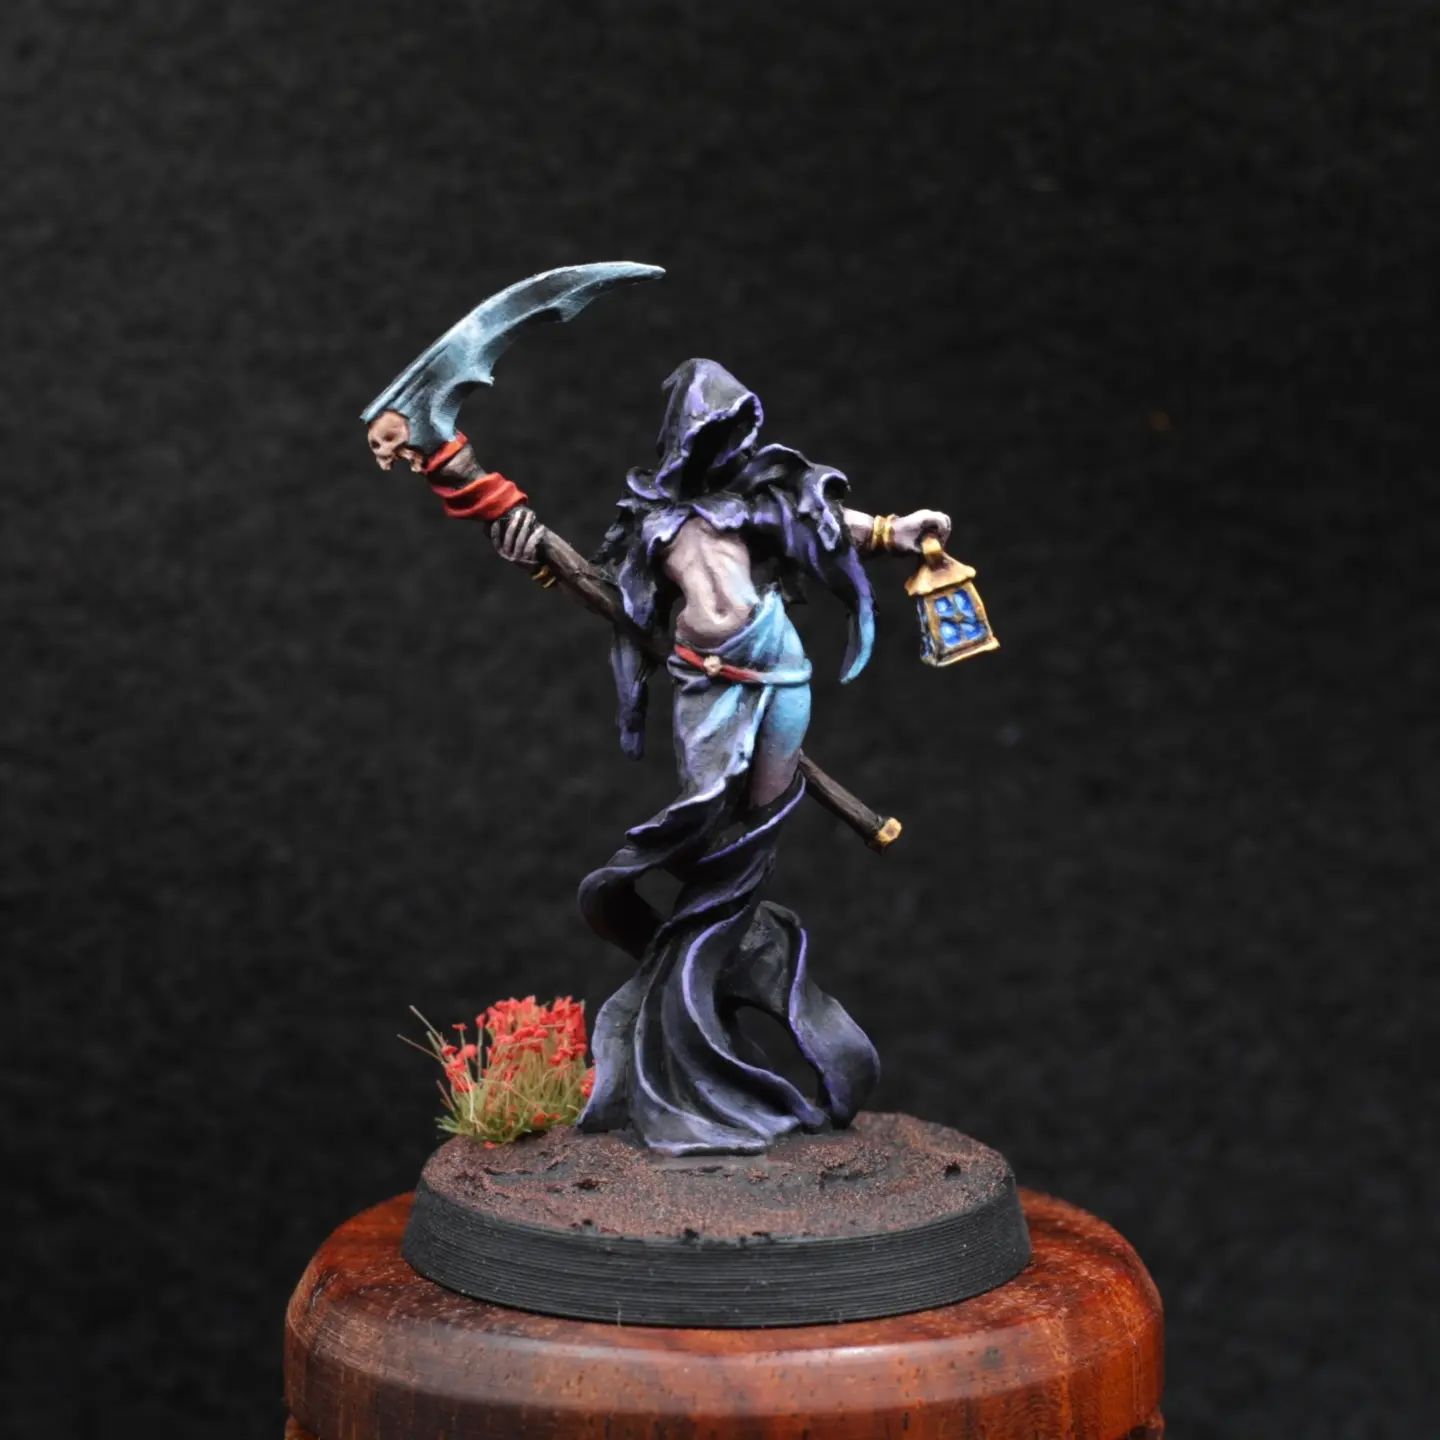 Reaper bones female wraith, painted it pretty quickly, just wanted to try osl out (object source lighting) #reaperminiatures #bones #wraith #undeead #mini #miniature #miniatures #death #undead #rpg #roleplaying #roleplay #roleplayinggame #syth #dnd #dungeonsanddragons